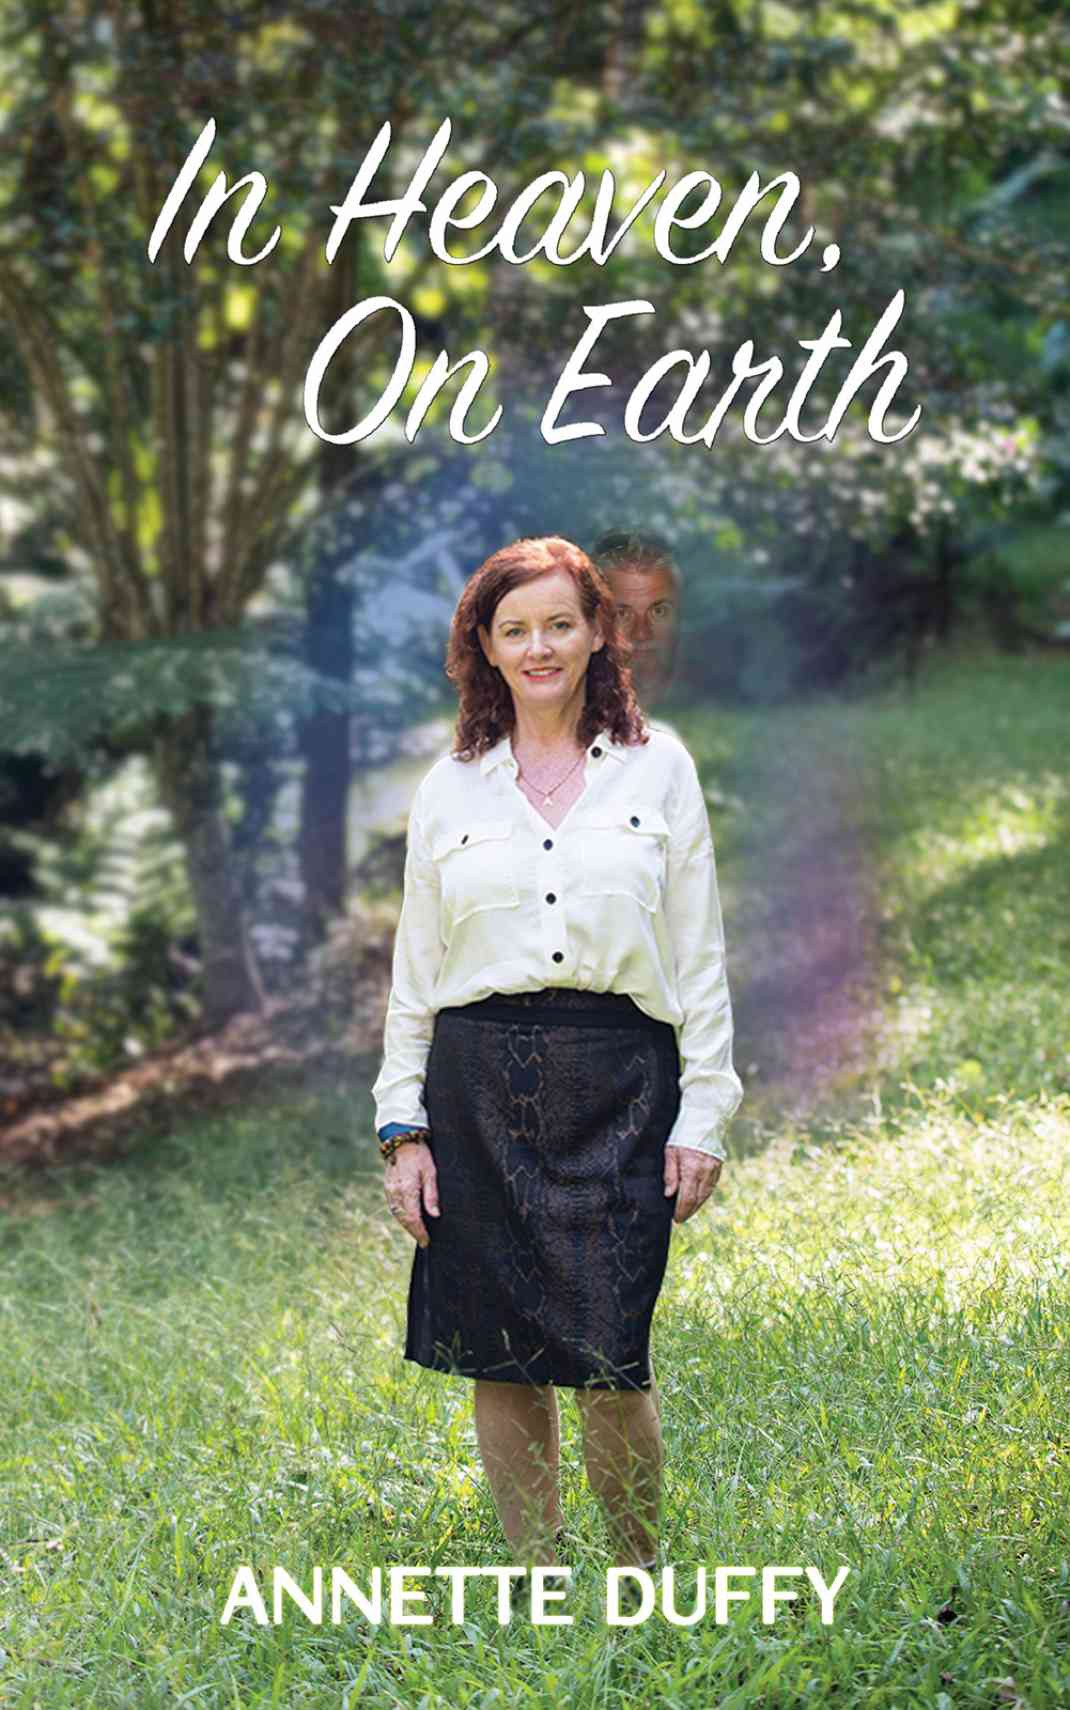 Book Trailer Video released for ‘In Heaven, On Earth’ by Annette Duffy